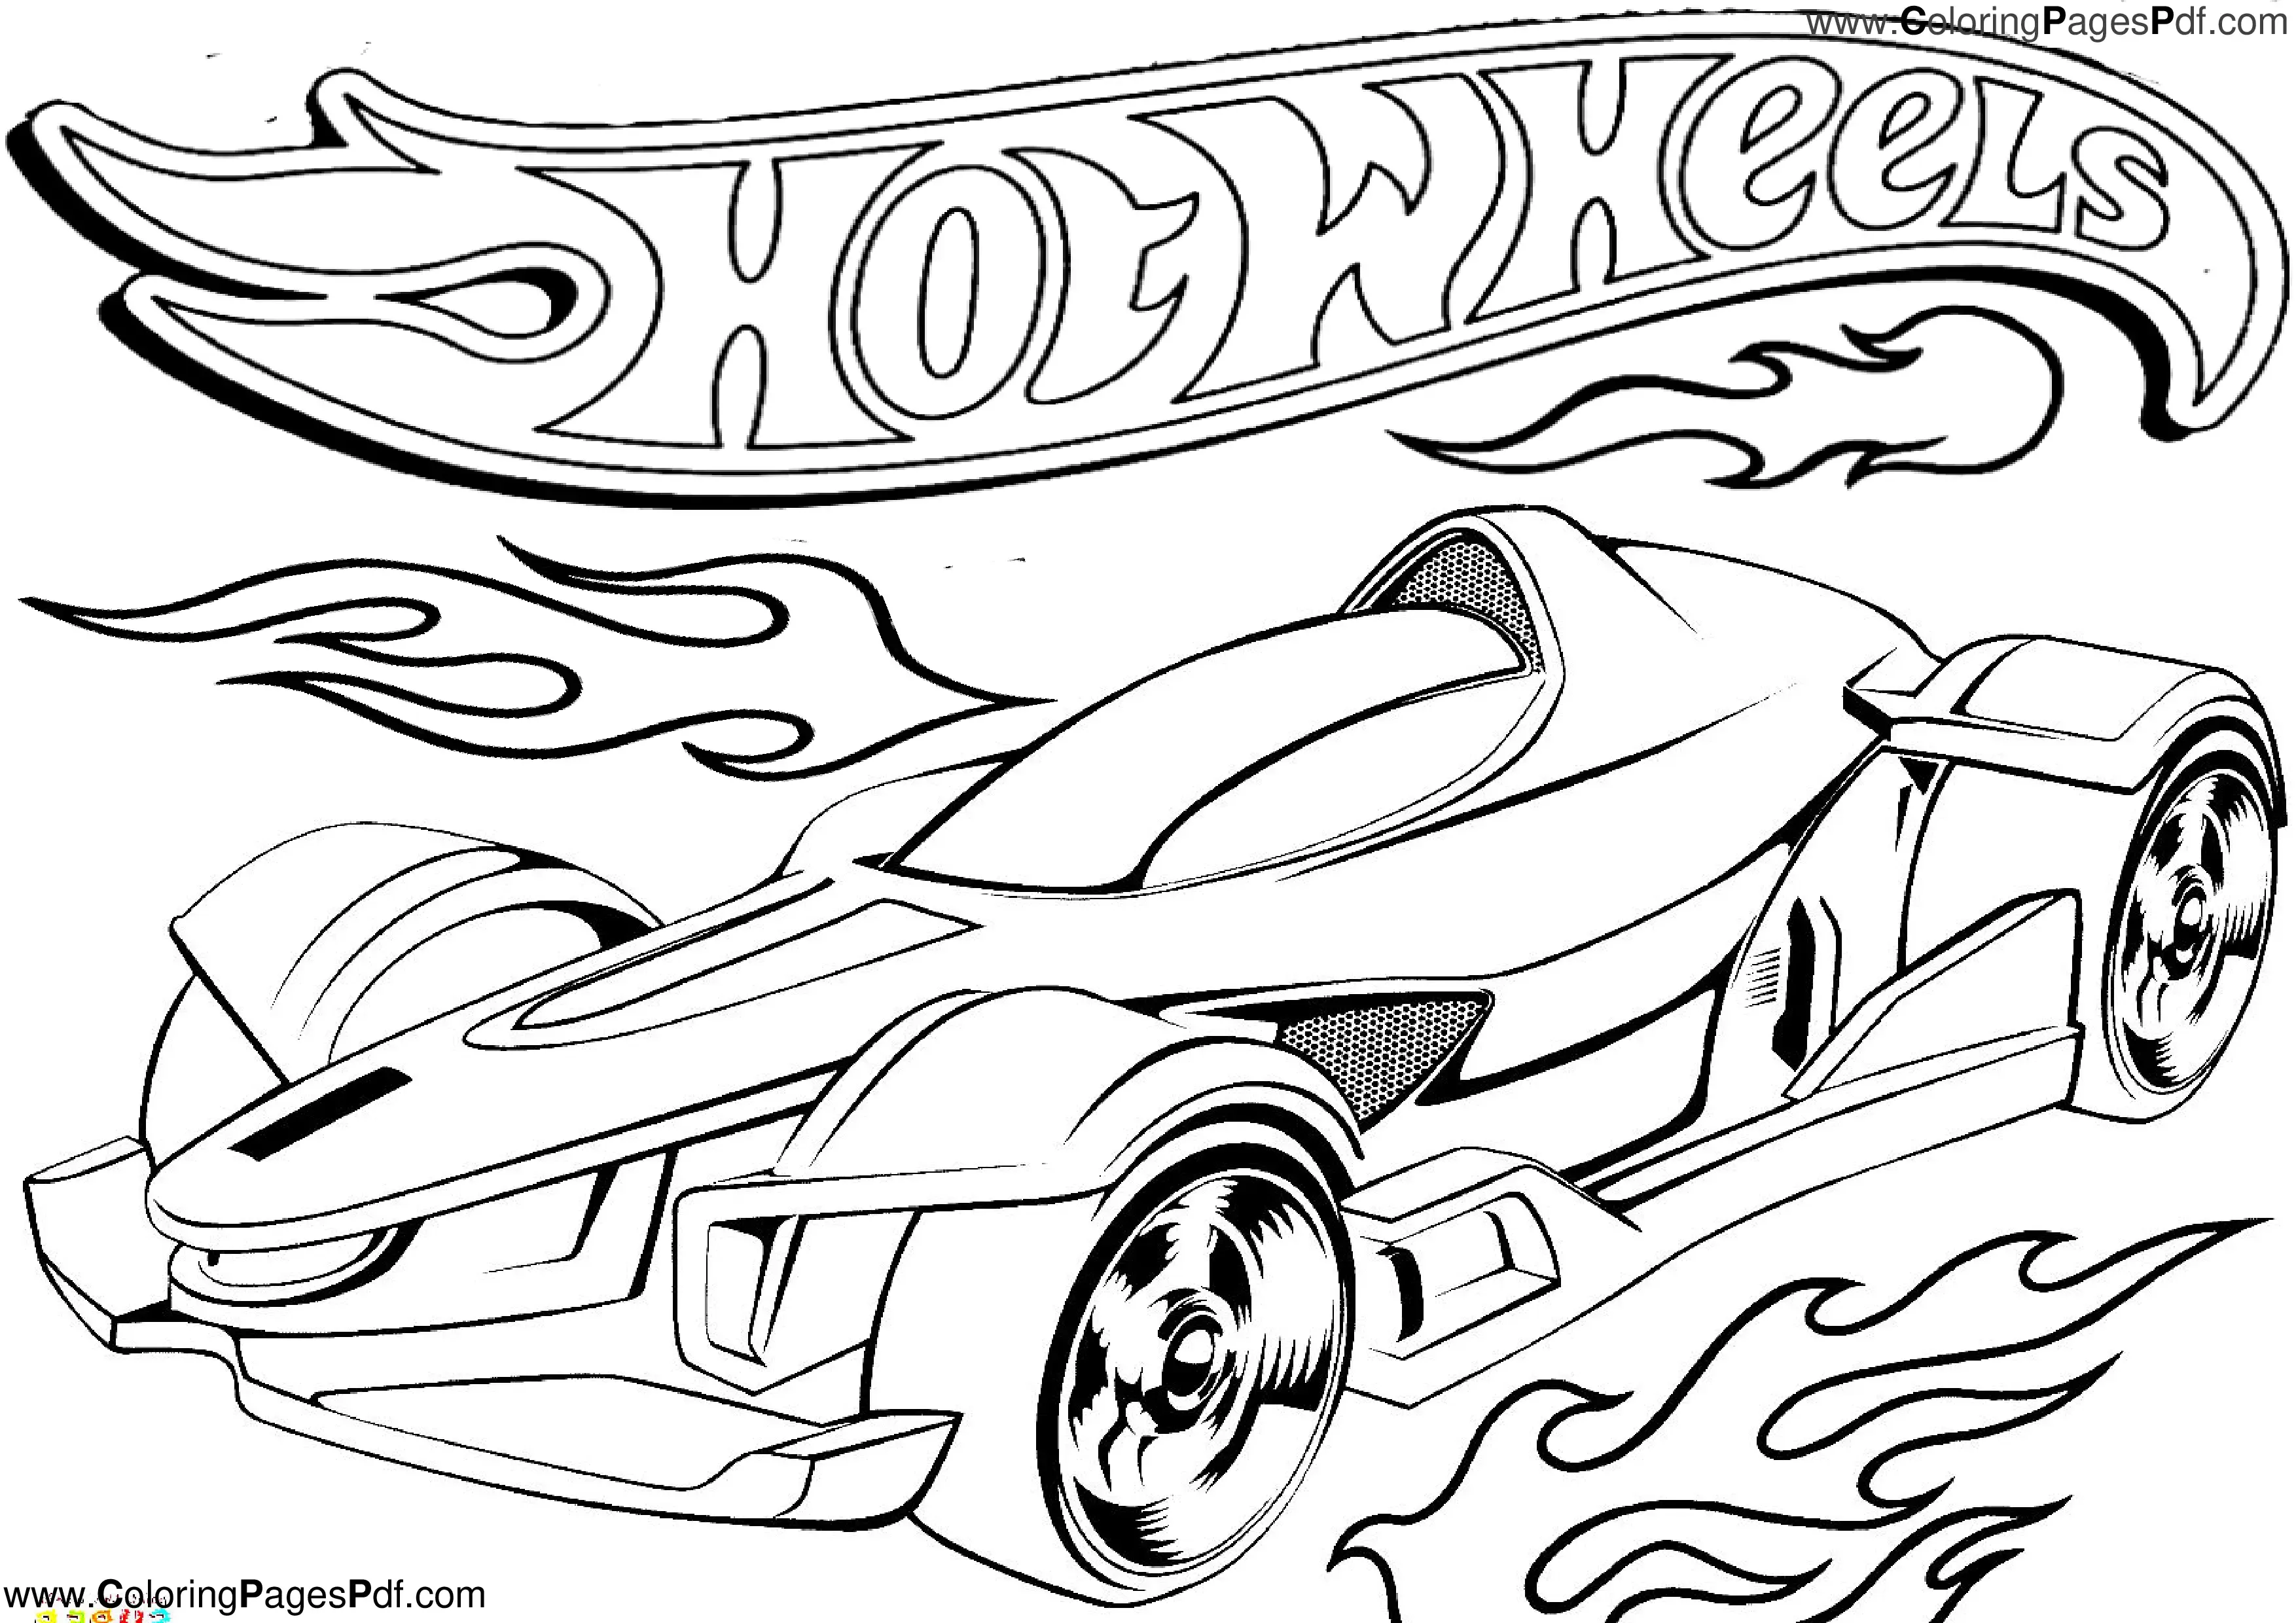 Free hot wheels coloring pages